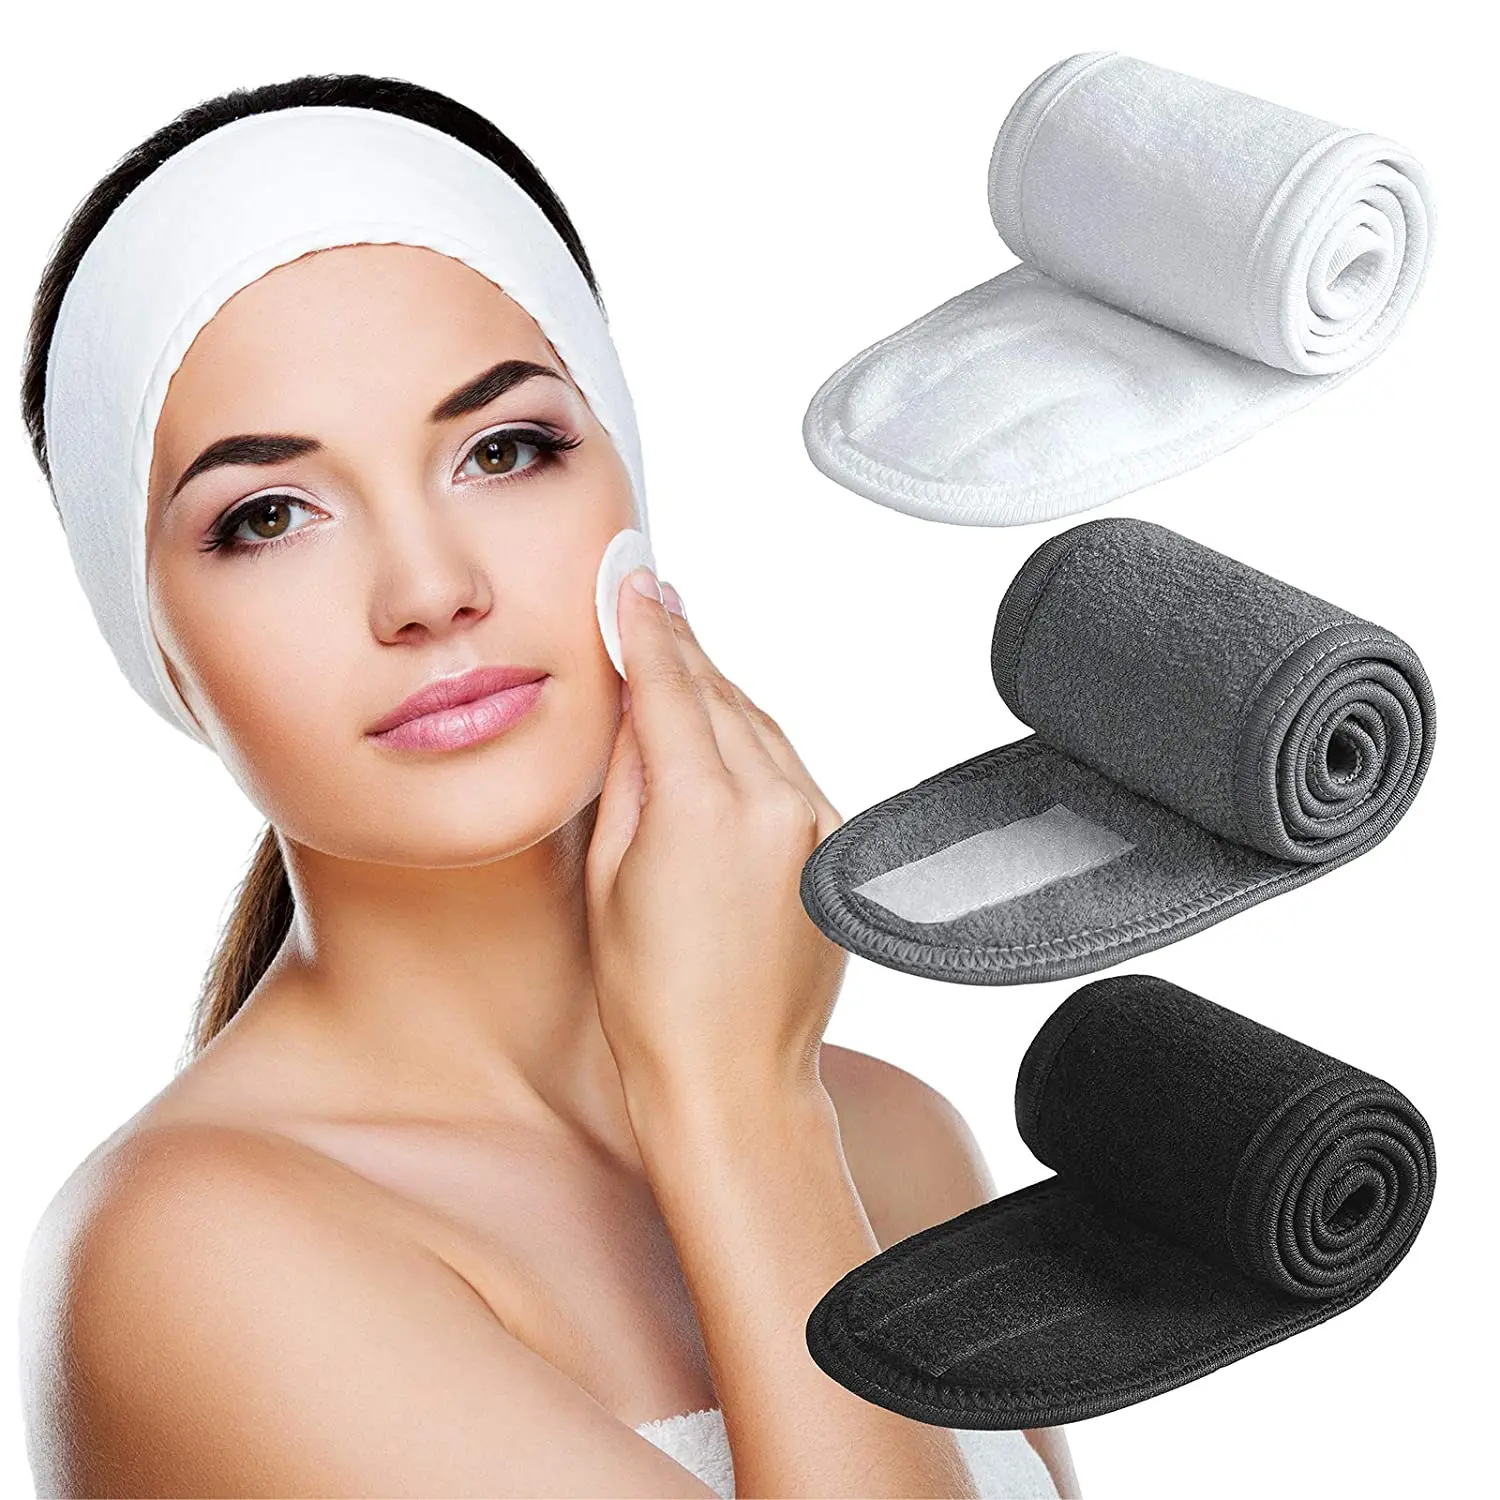 Spa Headband - 3 Pack Ultra Soft Adjustable Face Wash Headband Terry Cloth Stretch Make Up Wrap for Face Washing, Shower, Yoga зауженные брюки uniqlo ultra stretch dry ex